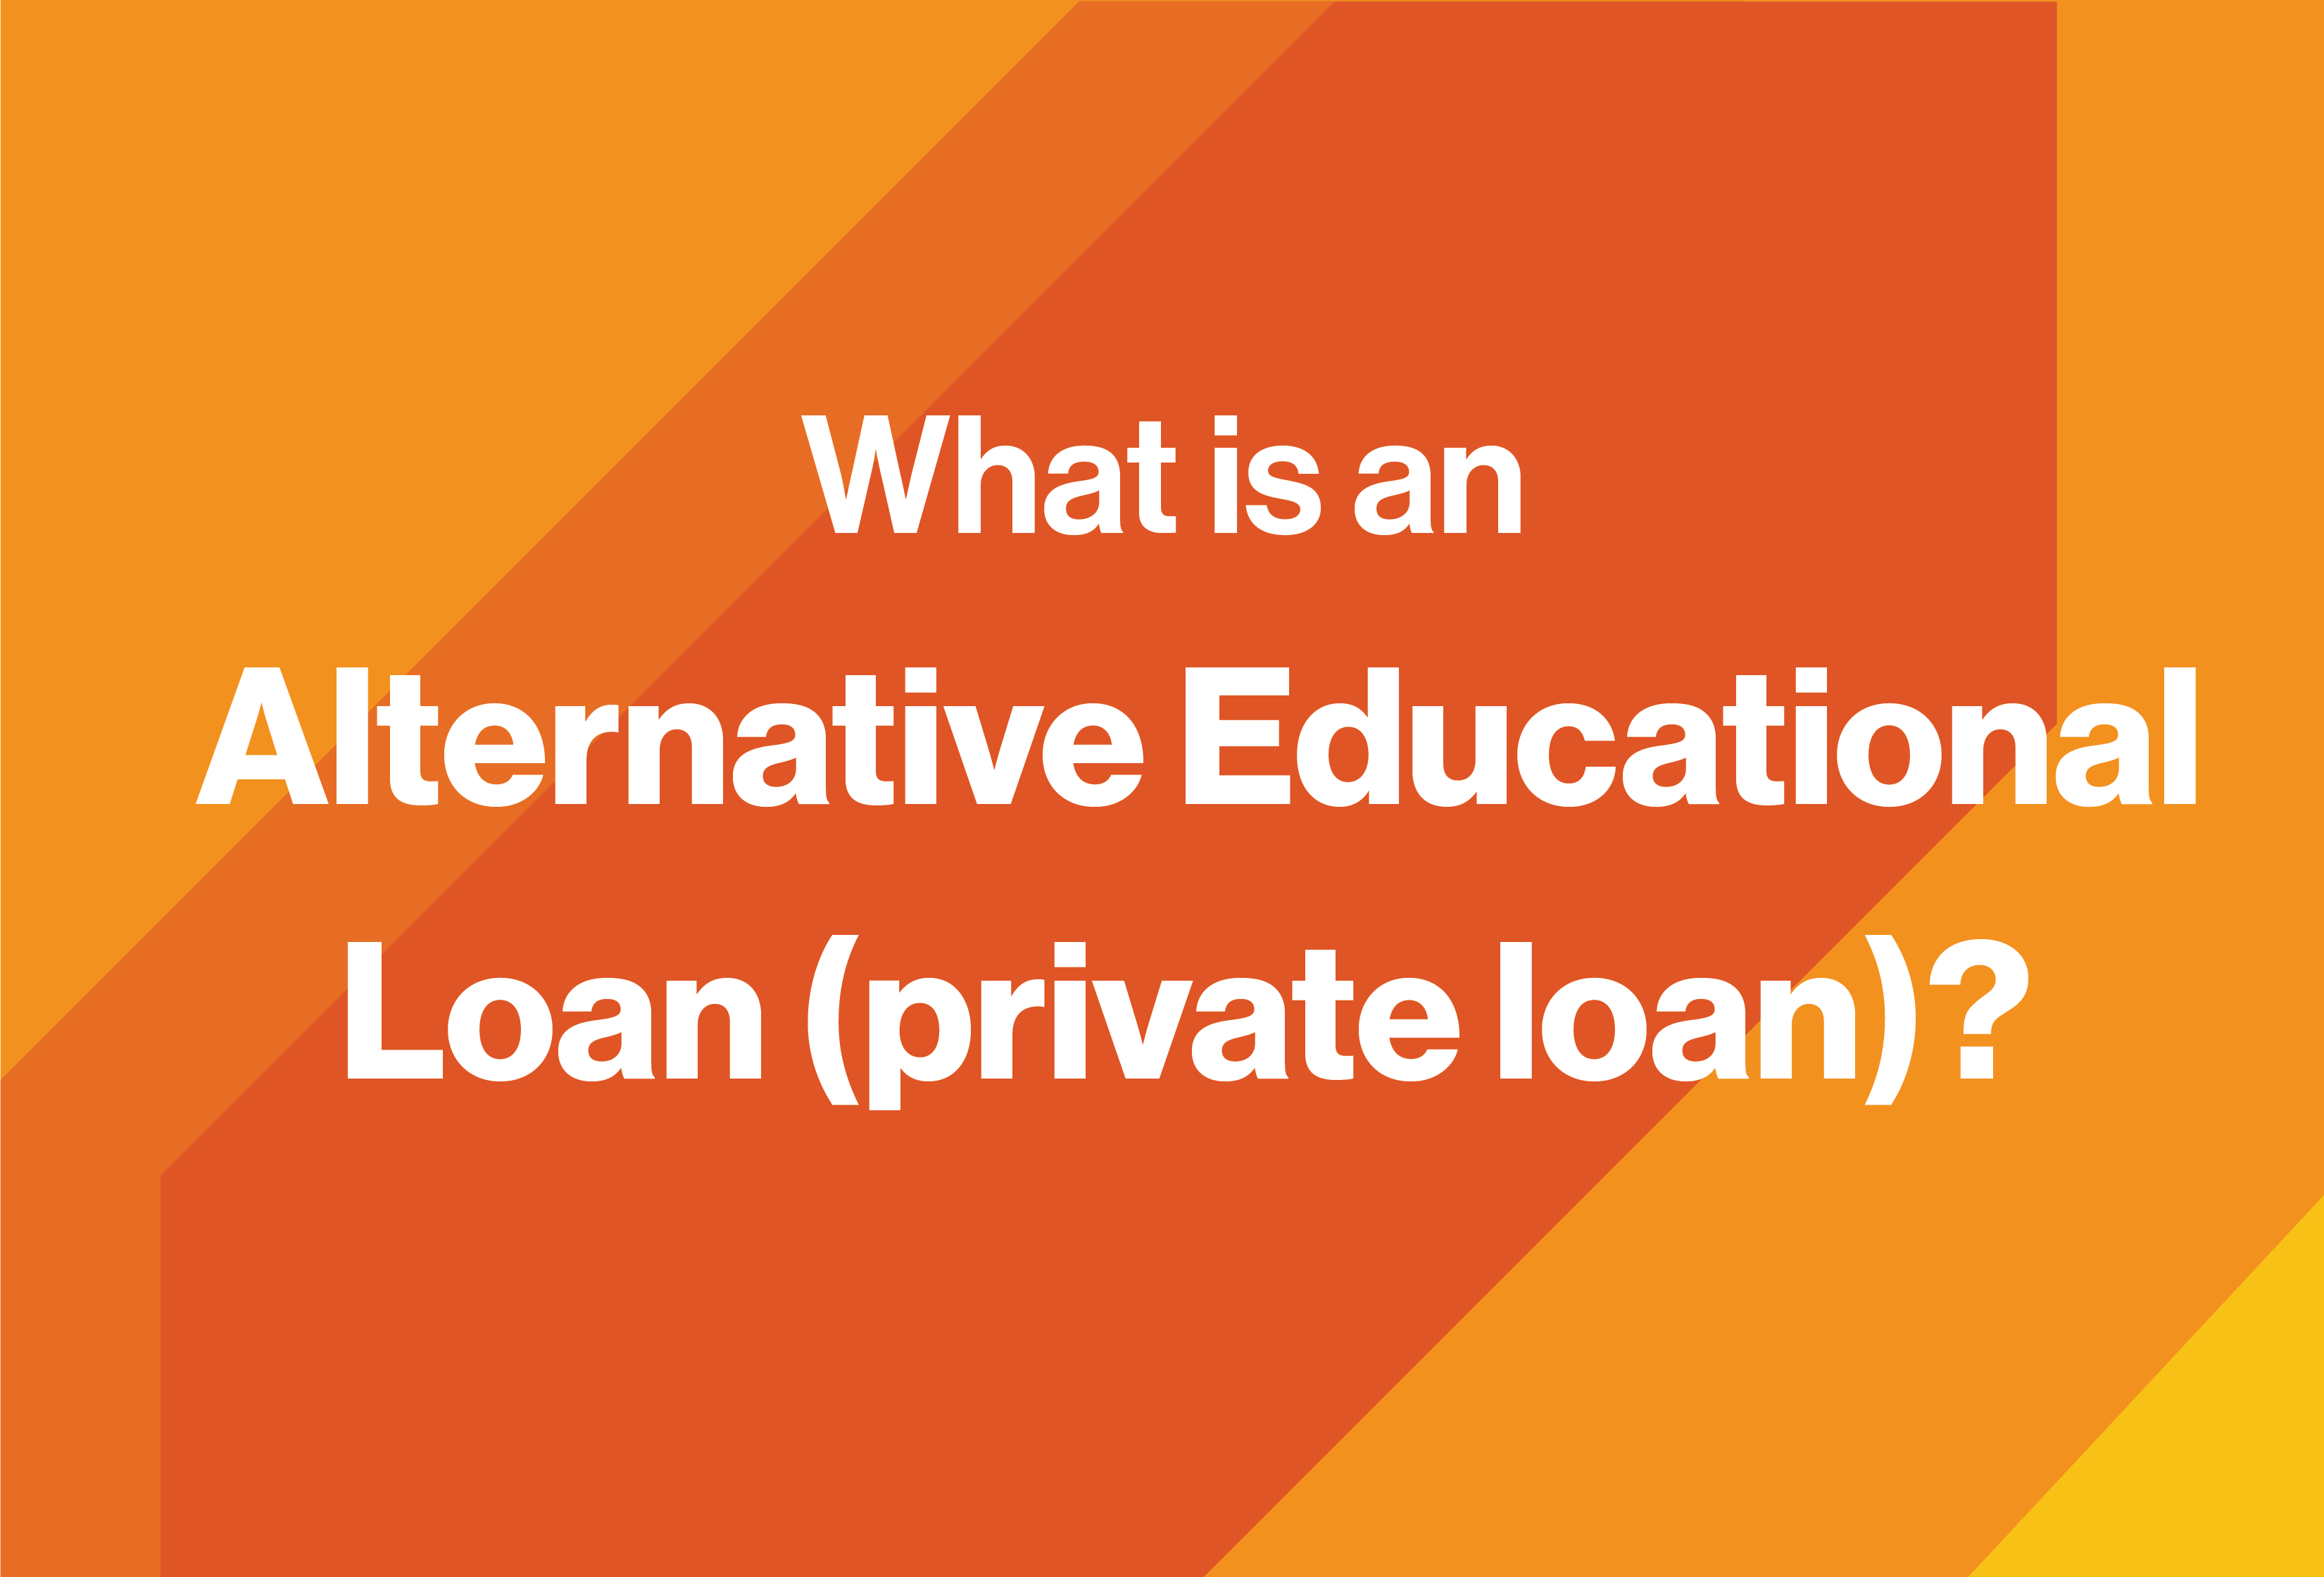 What is an Alternative Educational Loan (Private loan)?